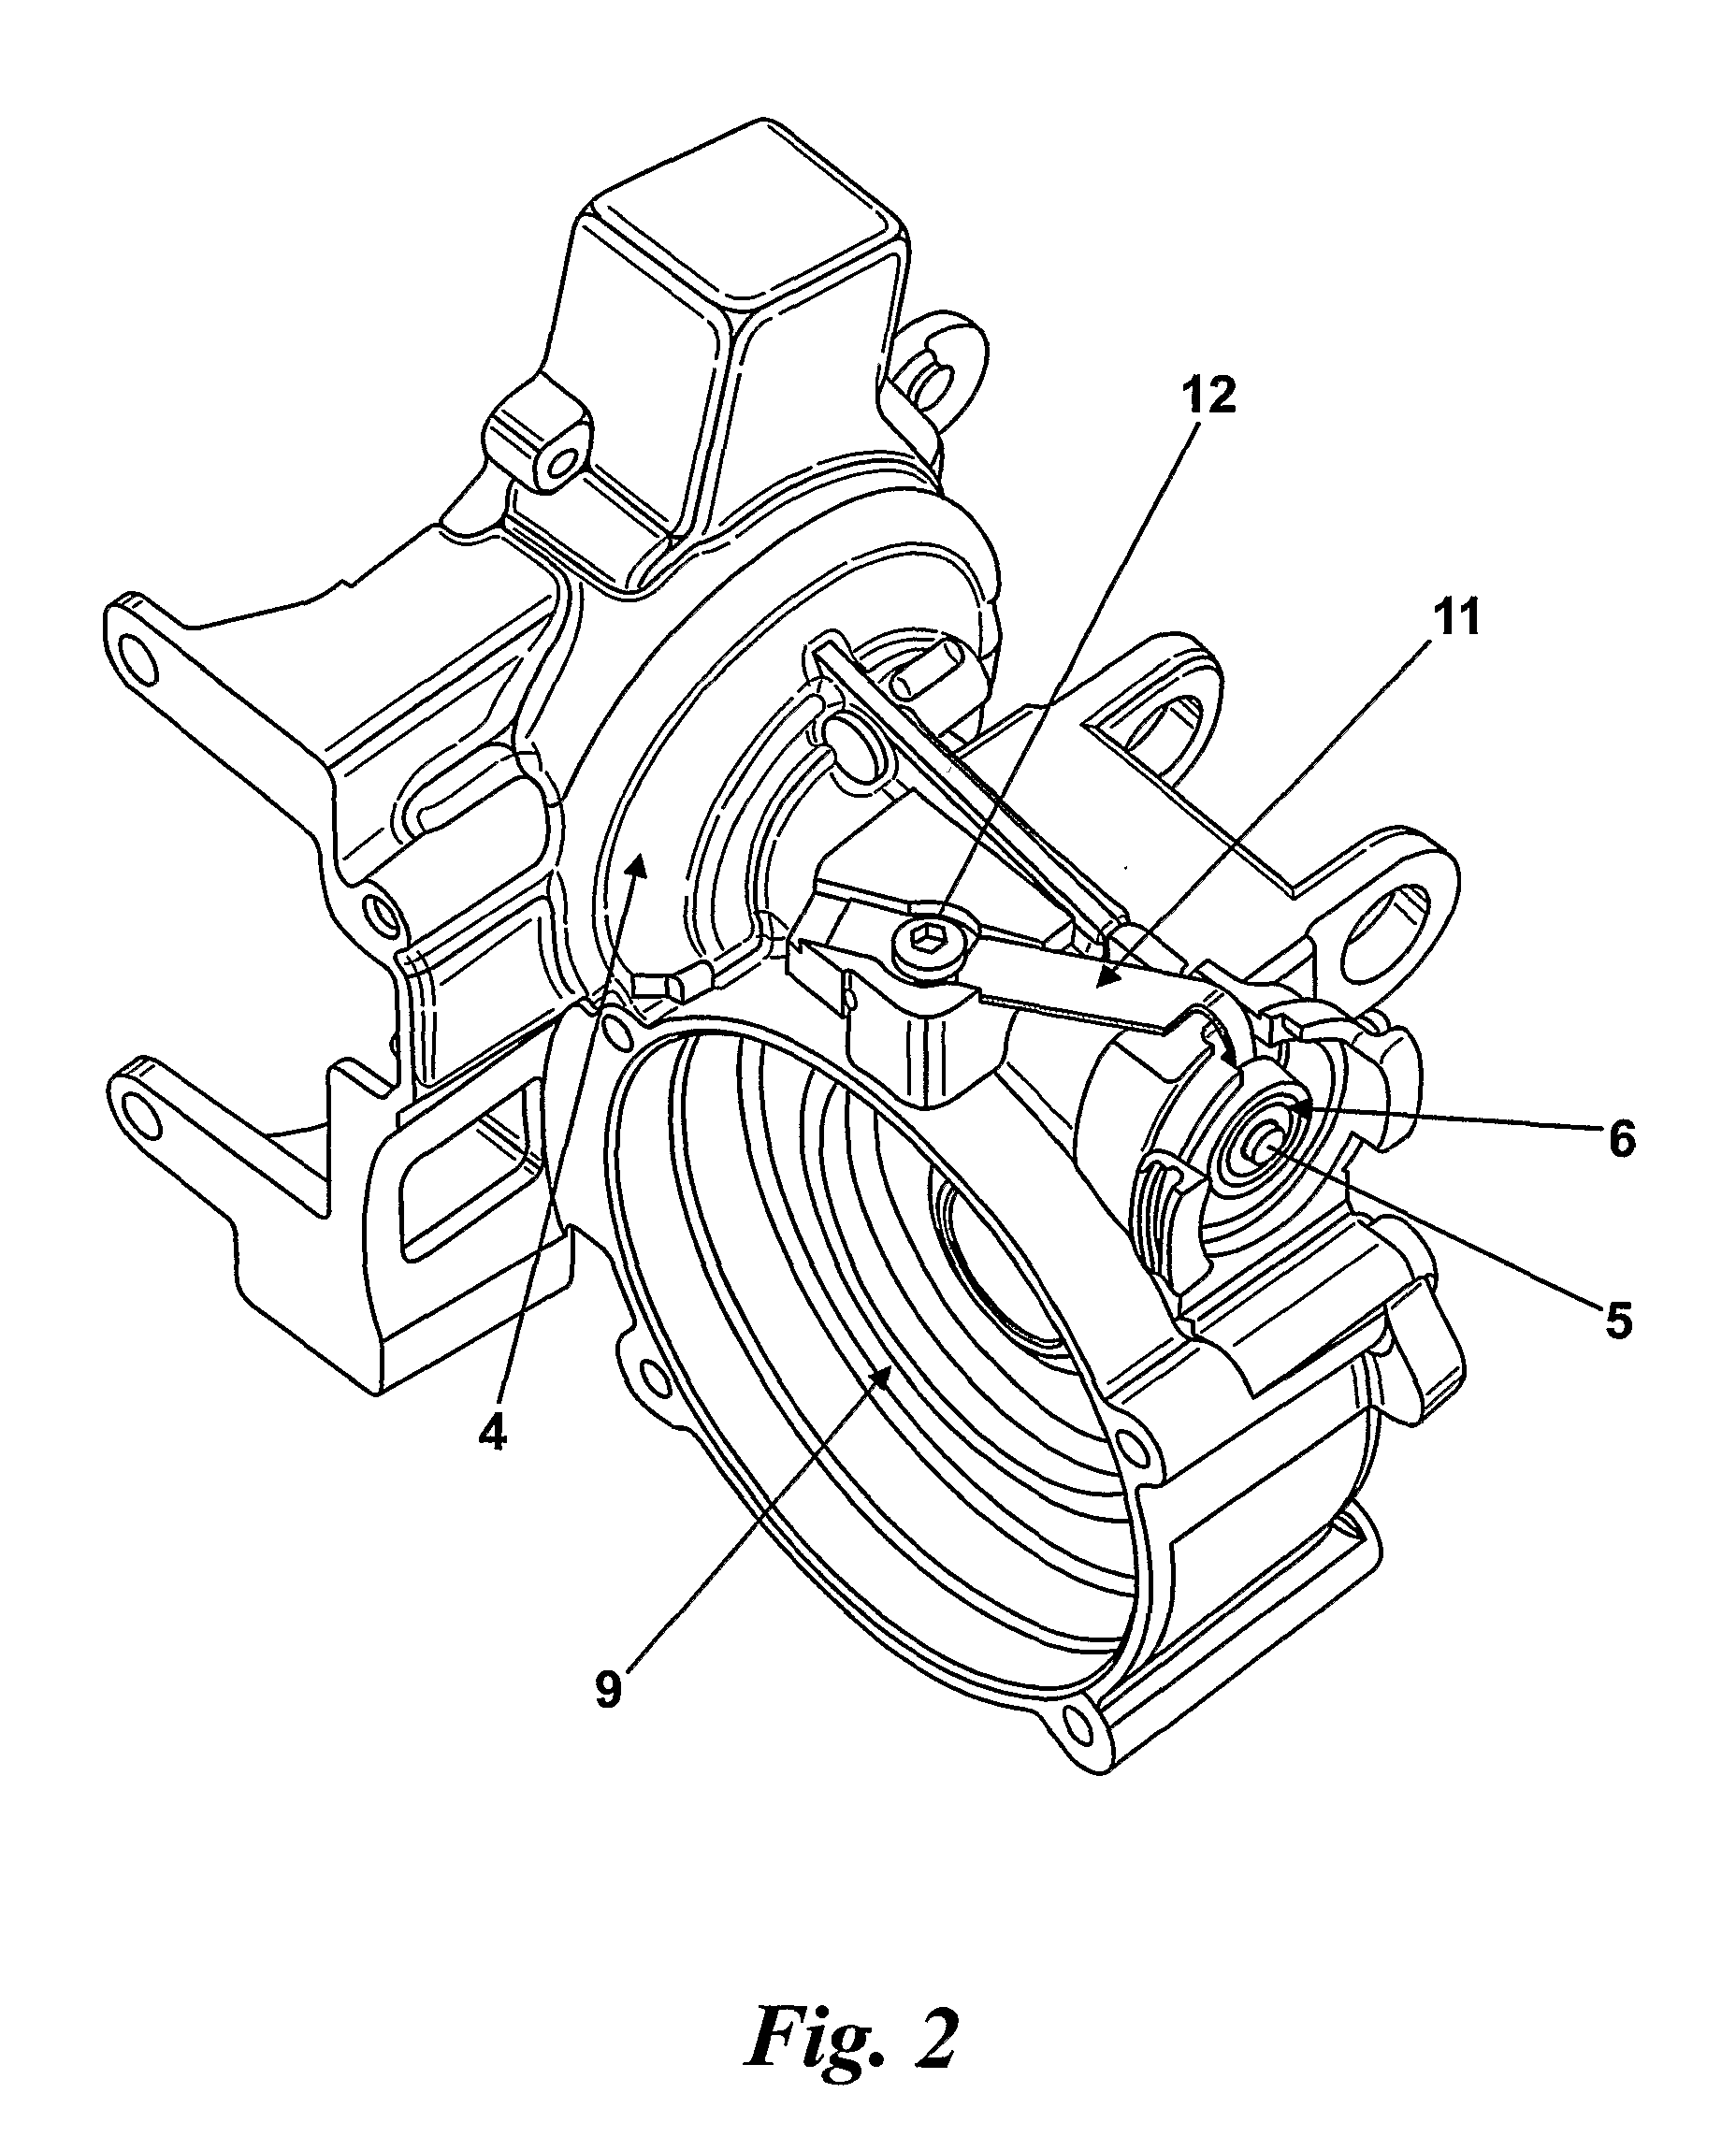 Gearbox Assembly for an Electric Power Steering System